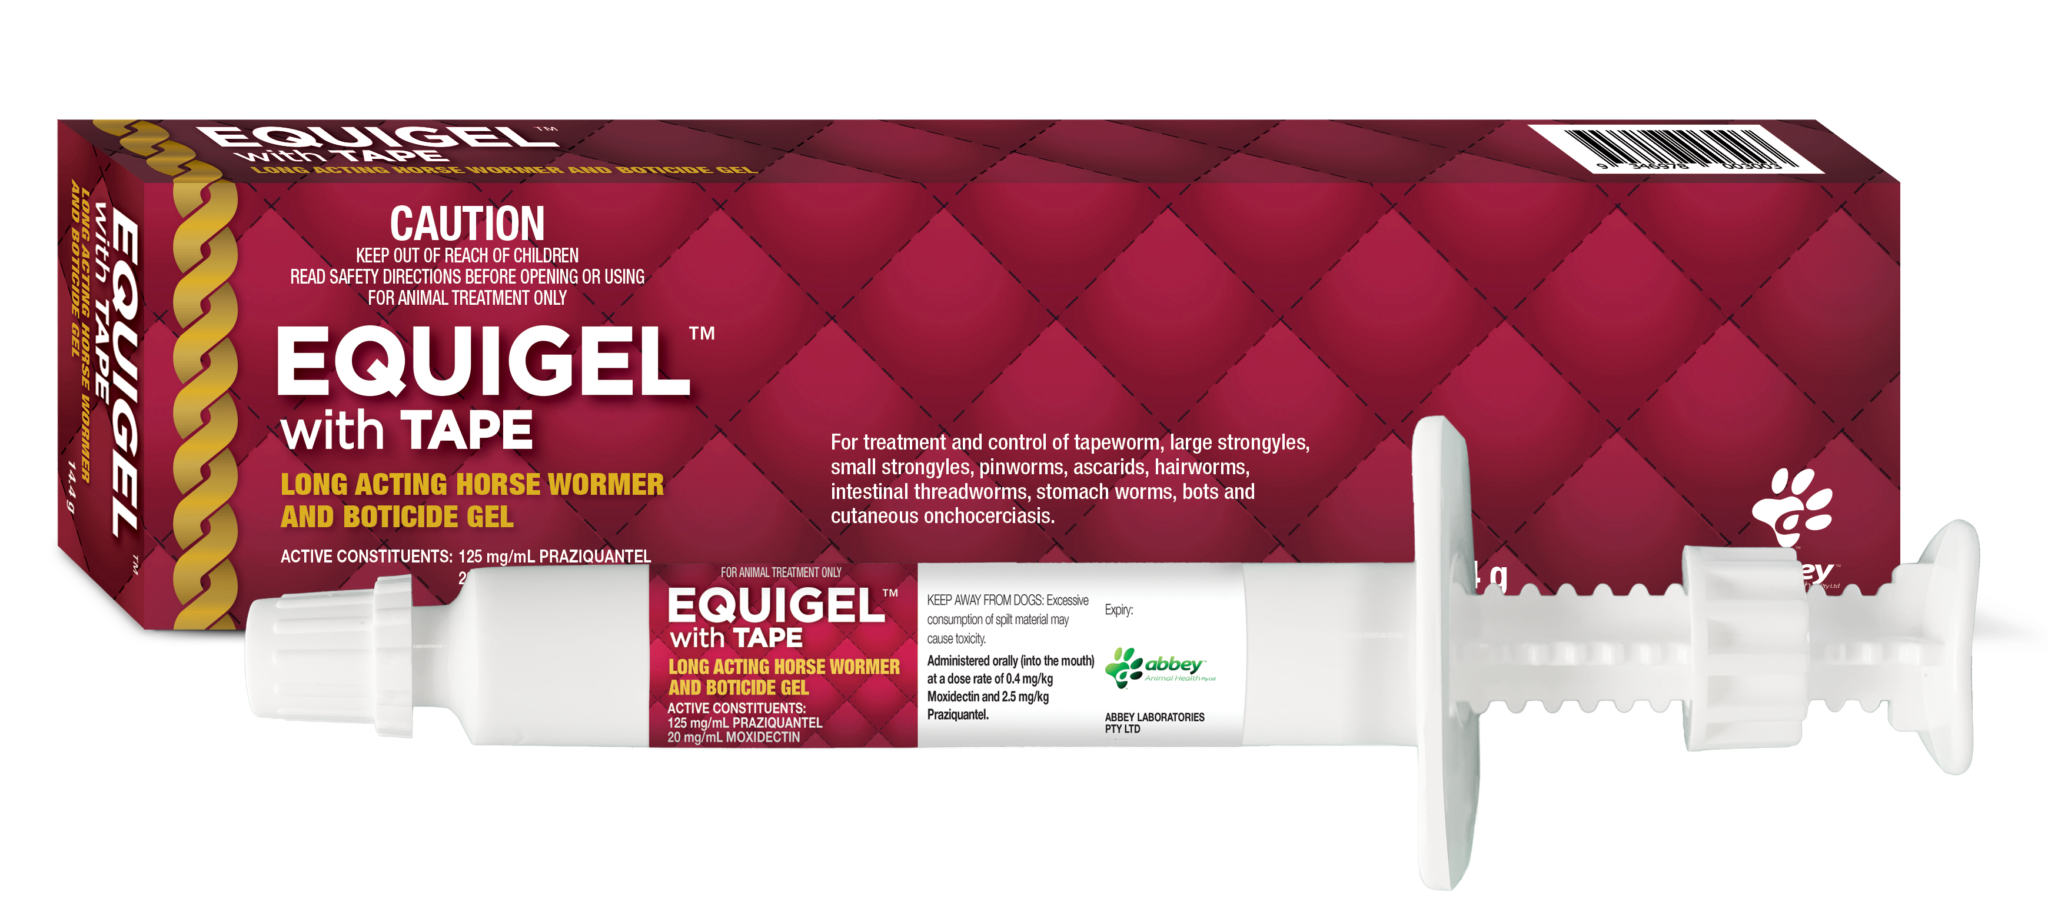 Equigel with Tape